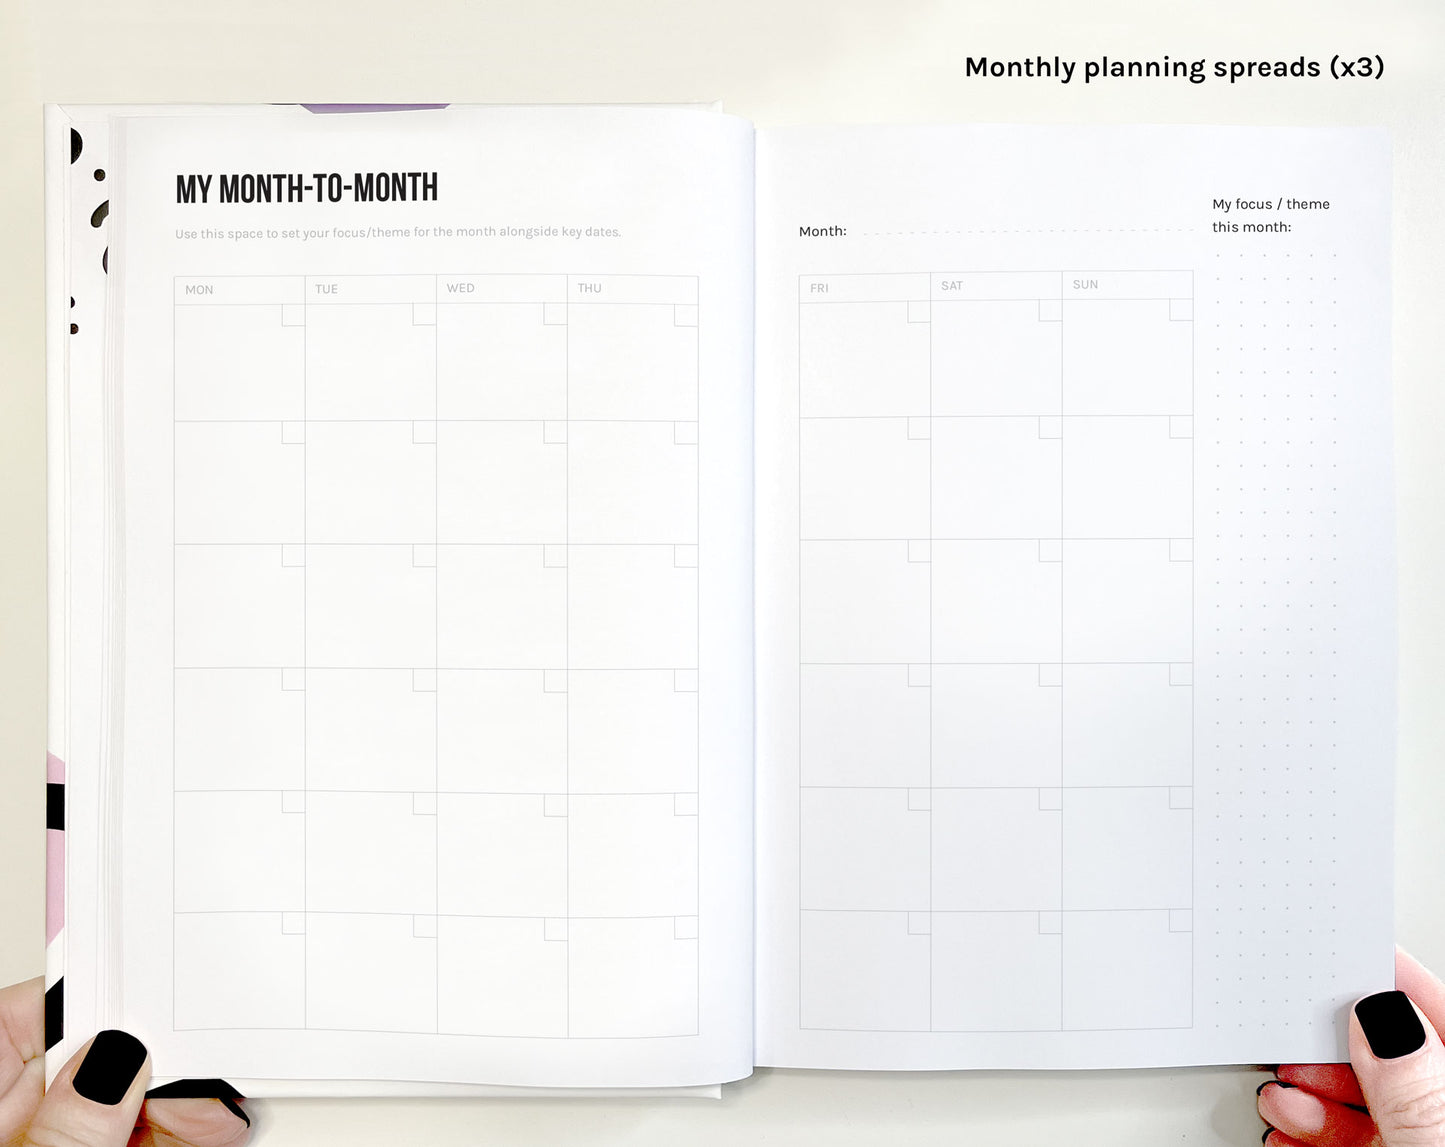 The Creative's Daily Planner – GRID